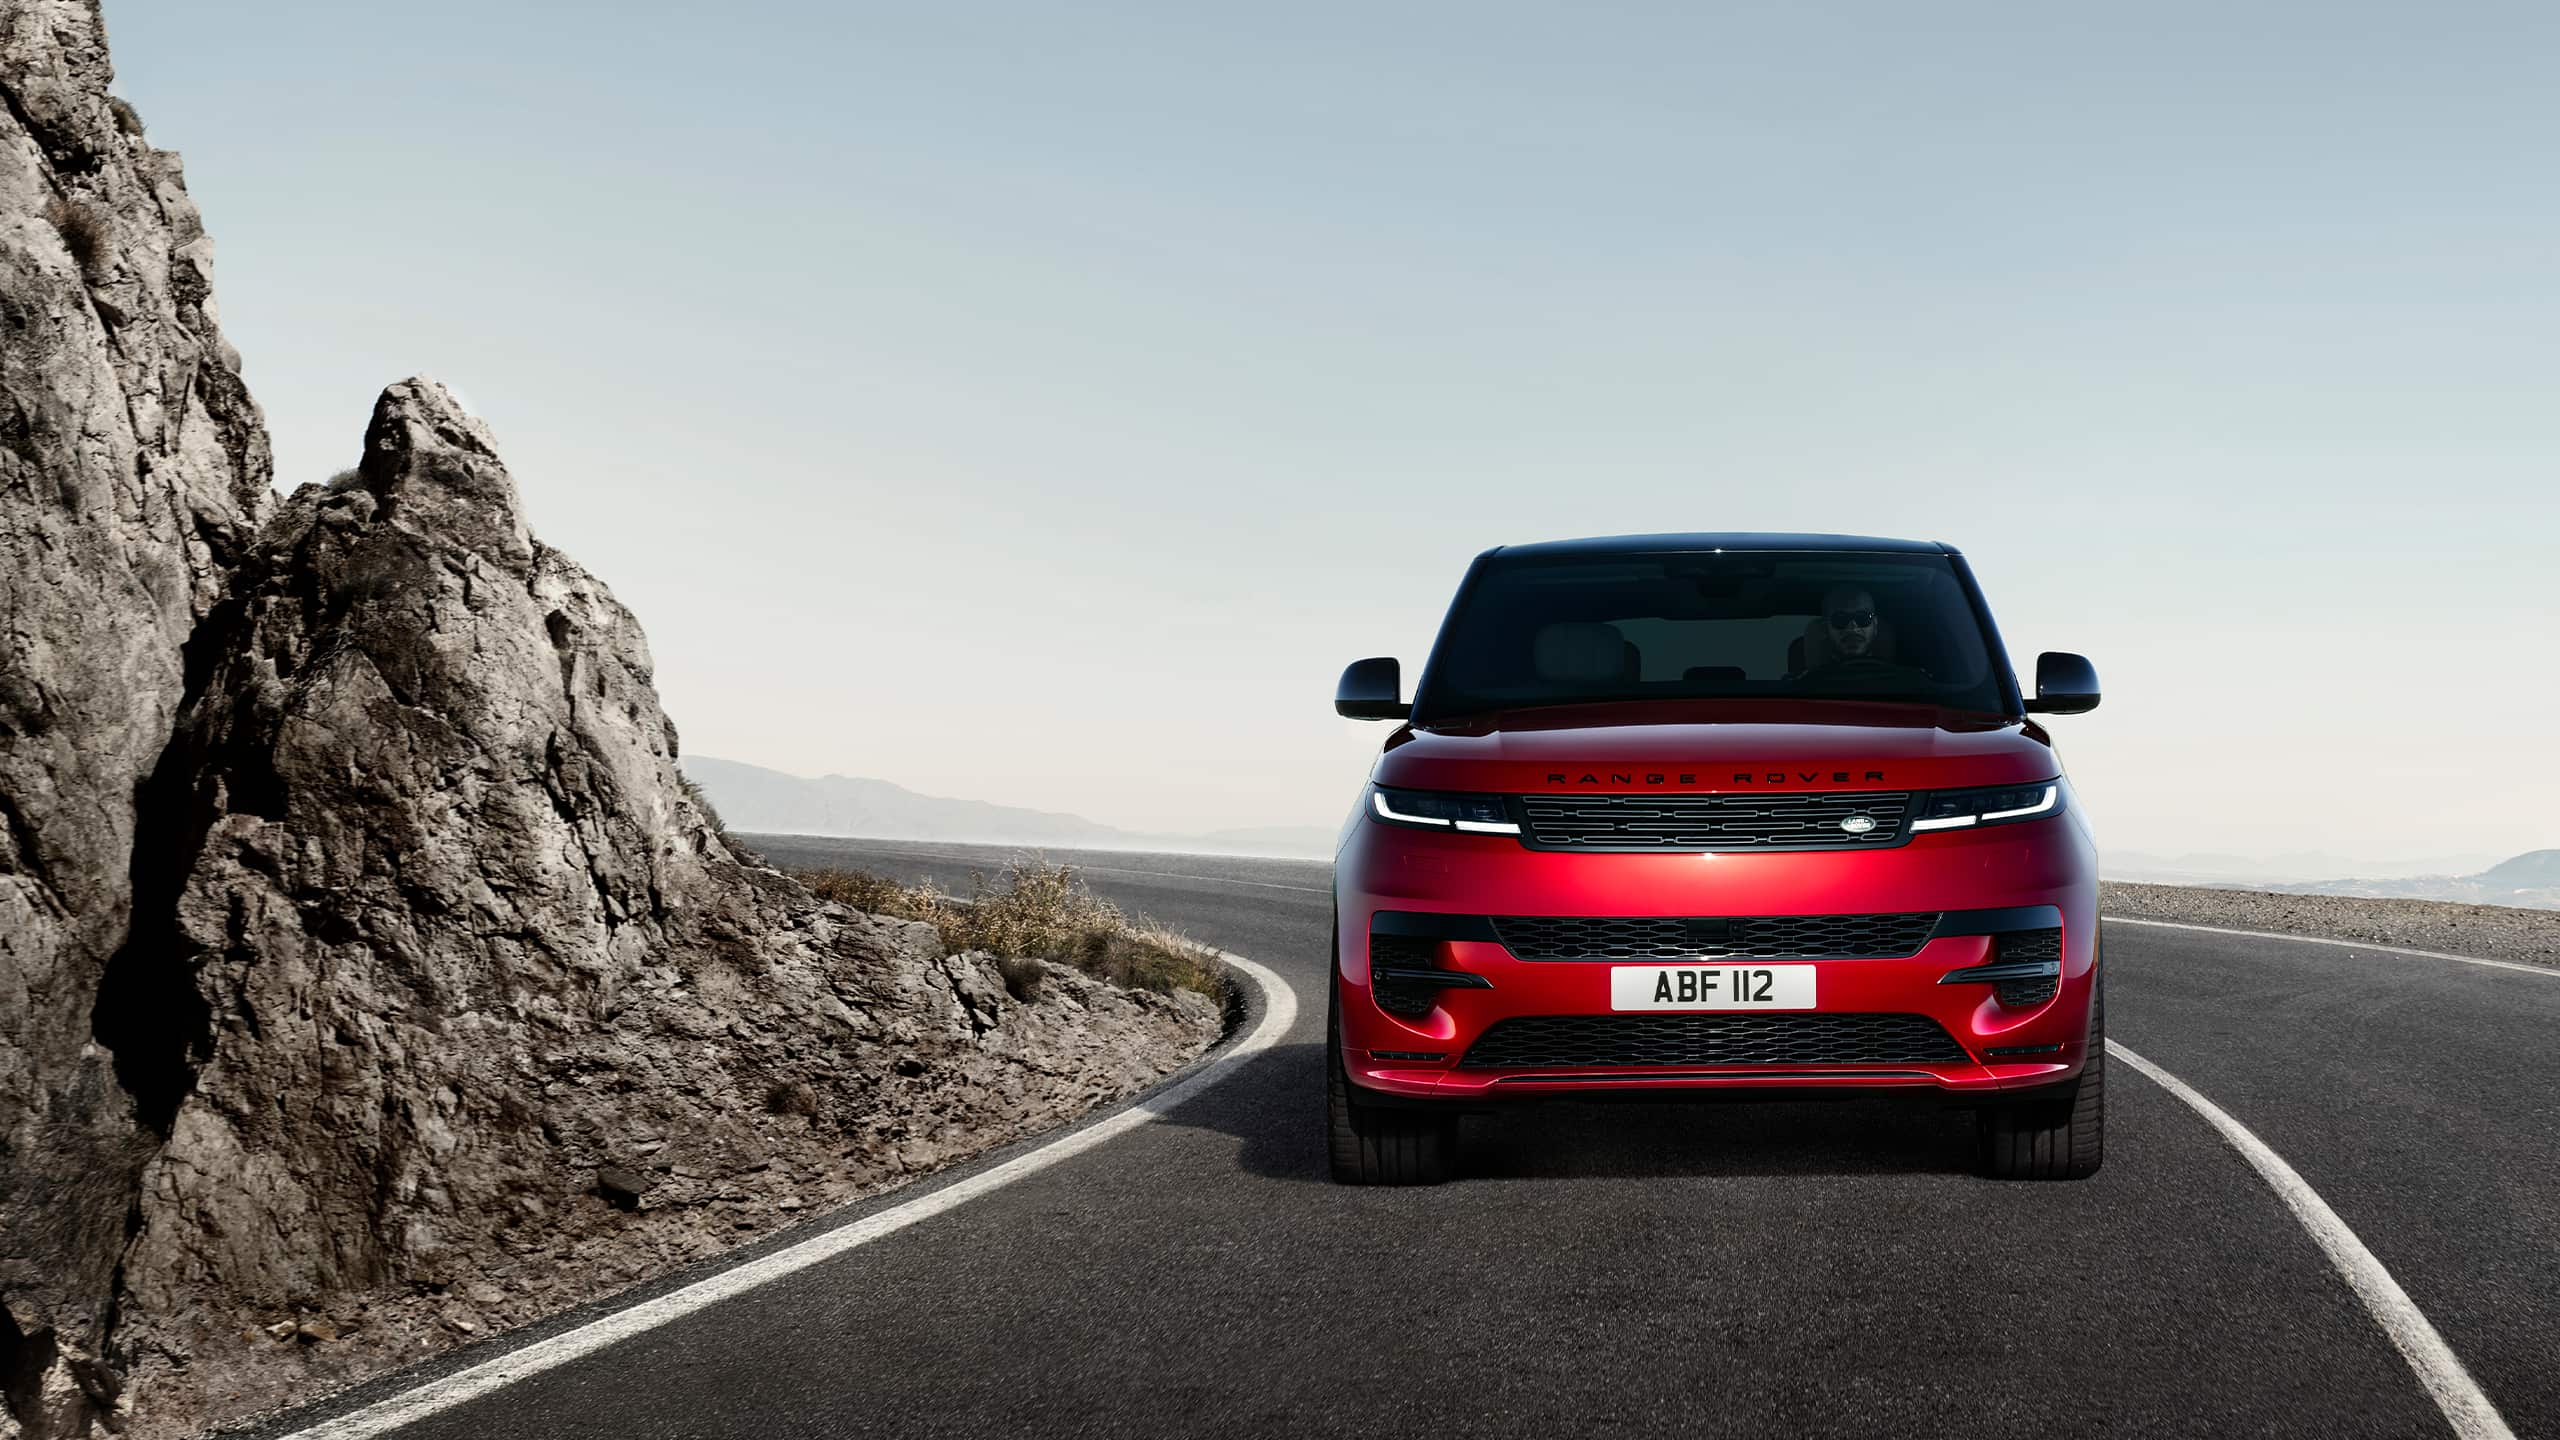 Range Rover Sport front view on road